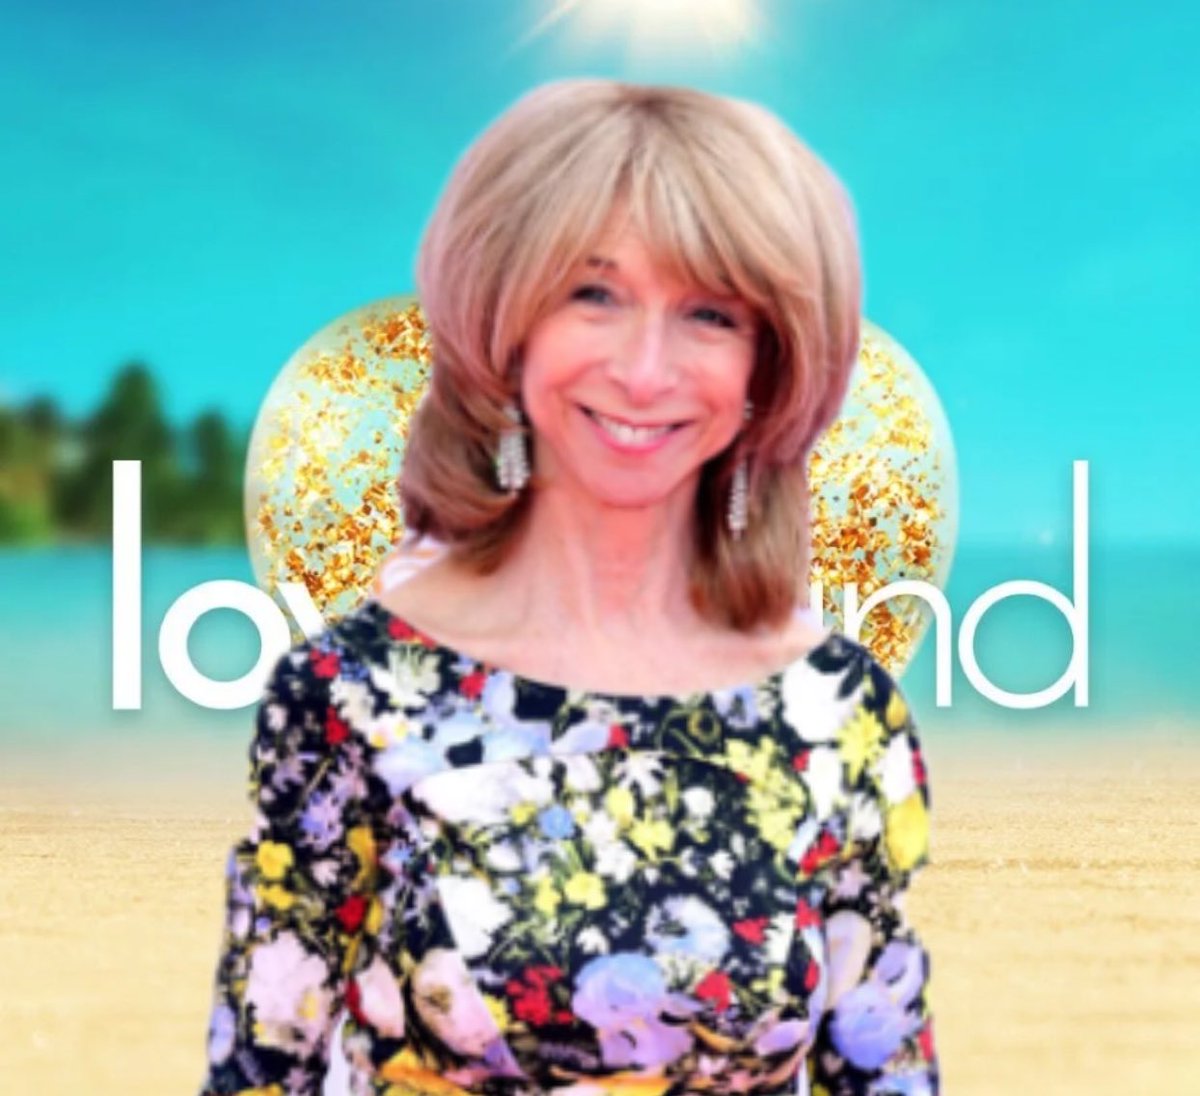 BREAKING: Gail Platt set to enter the Love Island Villa in under 2 weeks time. With 6 marriages and 4 dead husbands under her belt, she’s truly hopefully she can finally find ‘the one’.